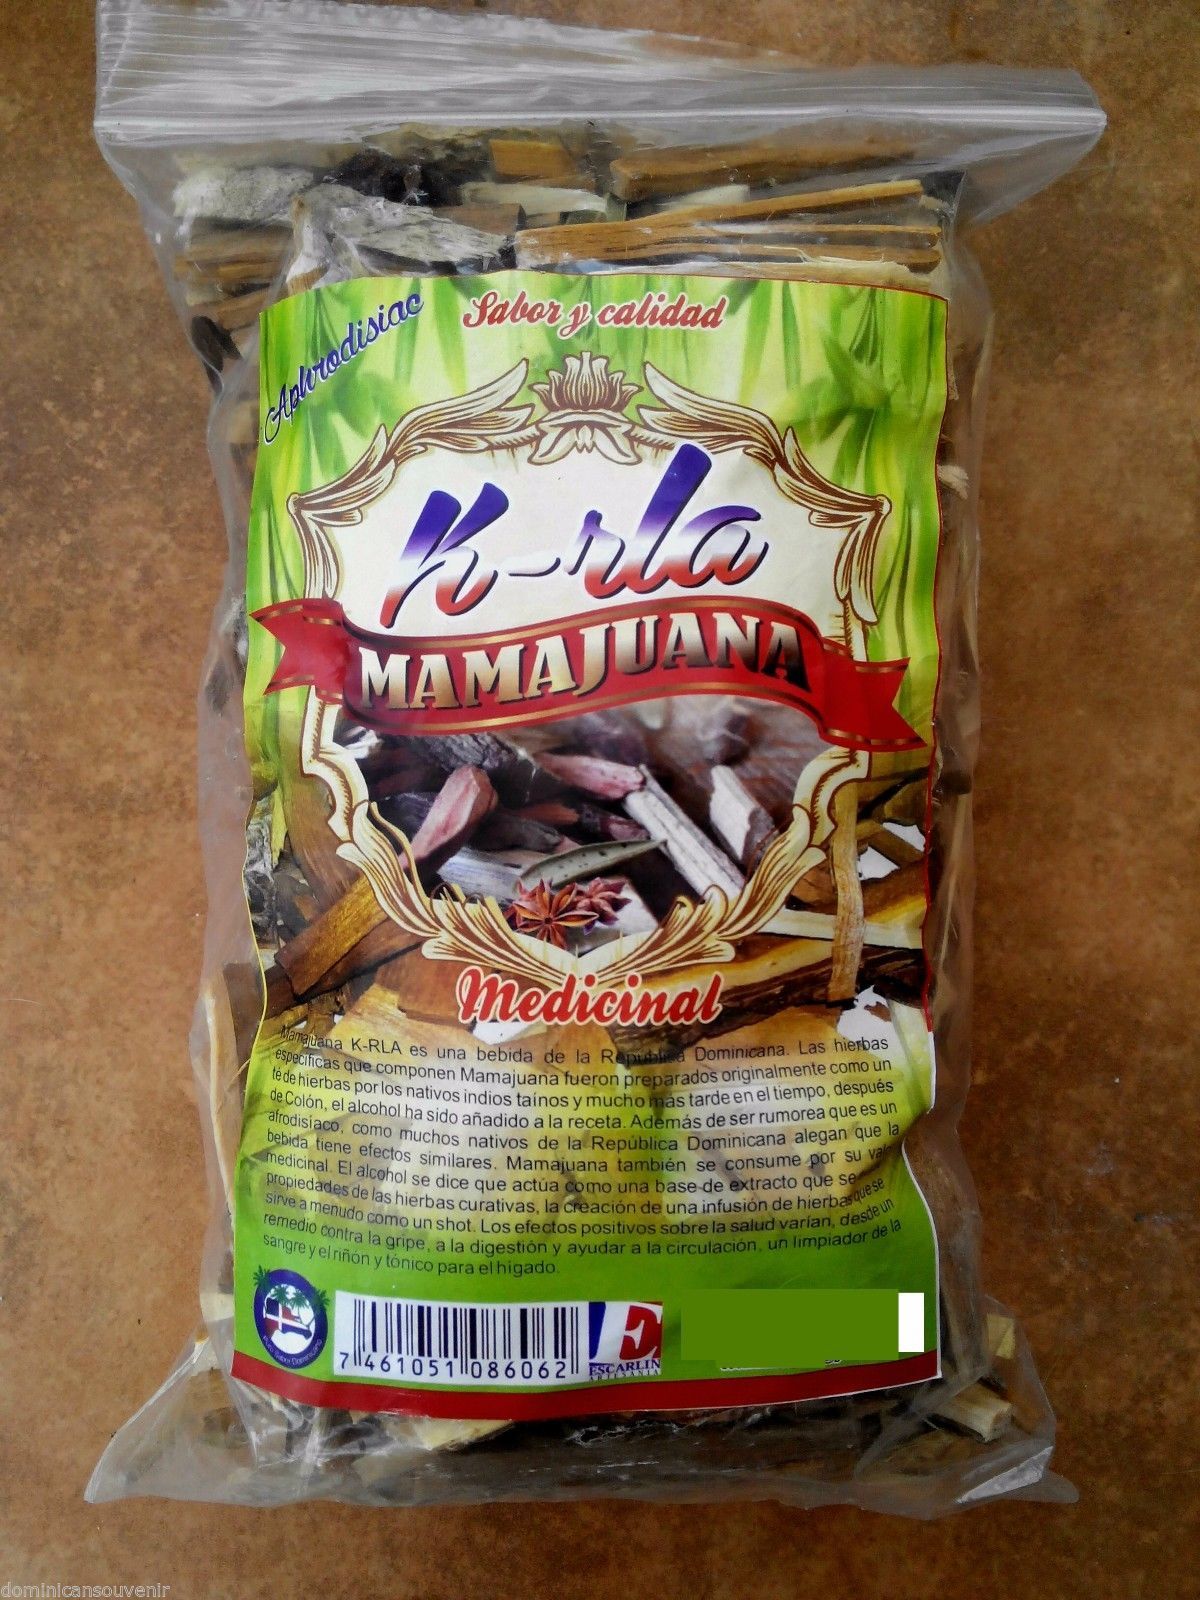 Mamajuana unique mix of herbs and roots from Dominican Republic - $35.00